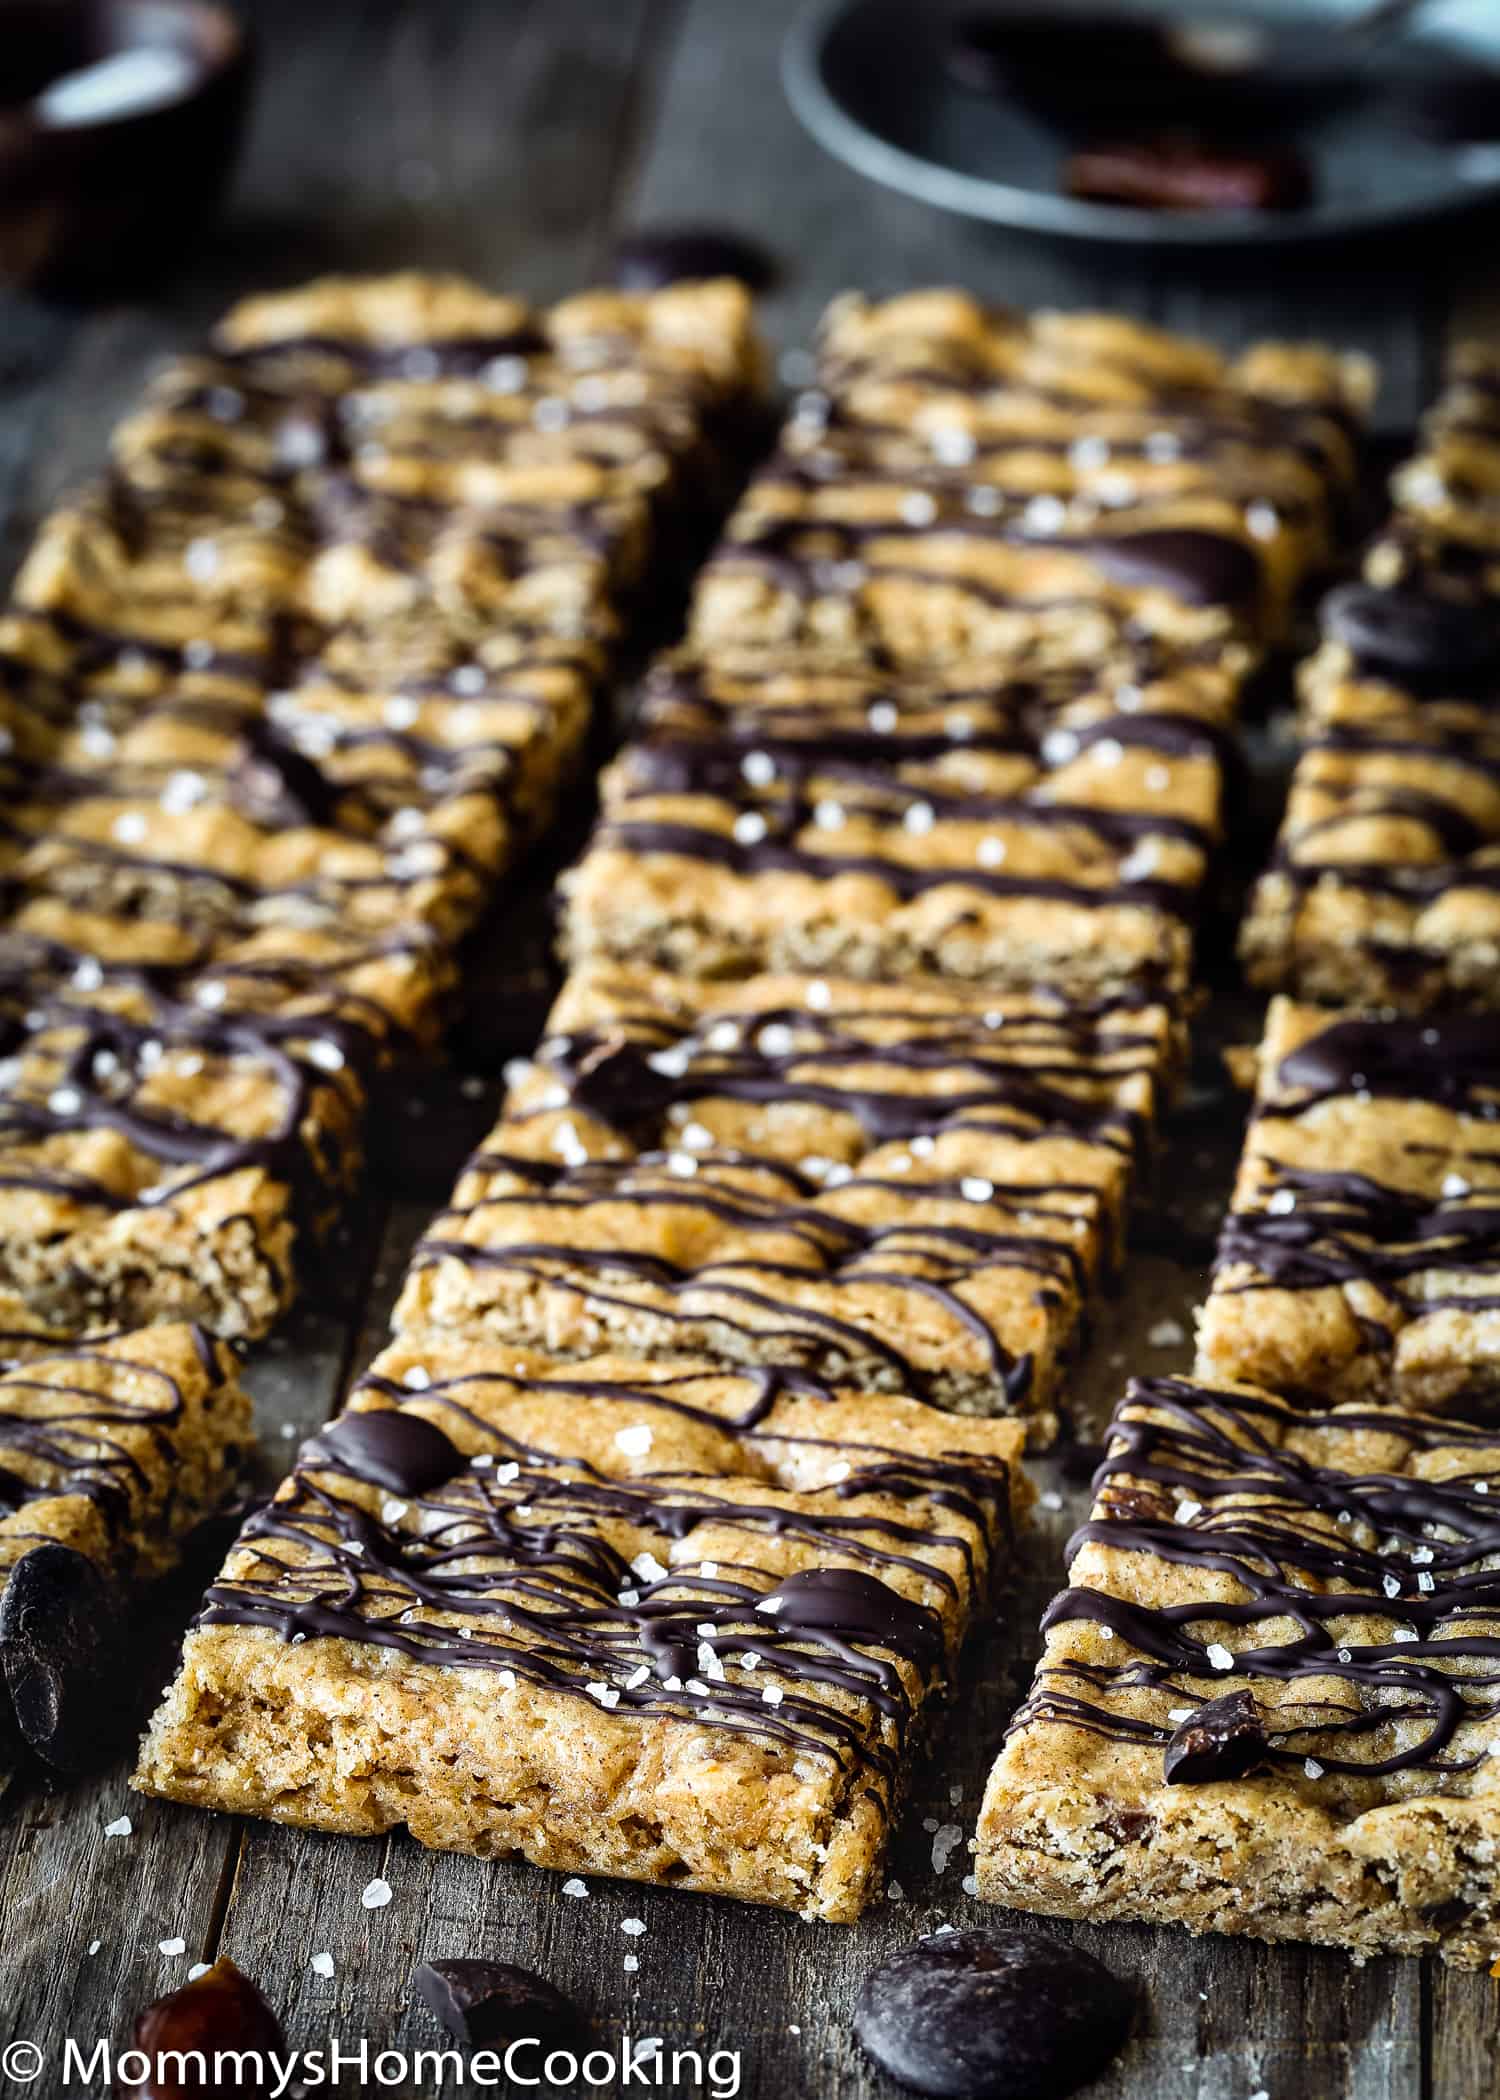 Homemade Healthy Eggless Energy Bars drizzled with chocolate.